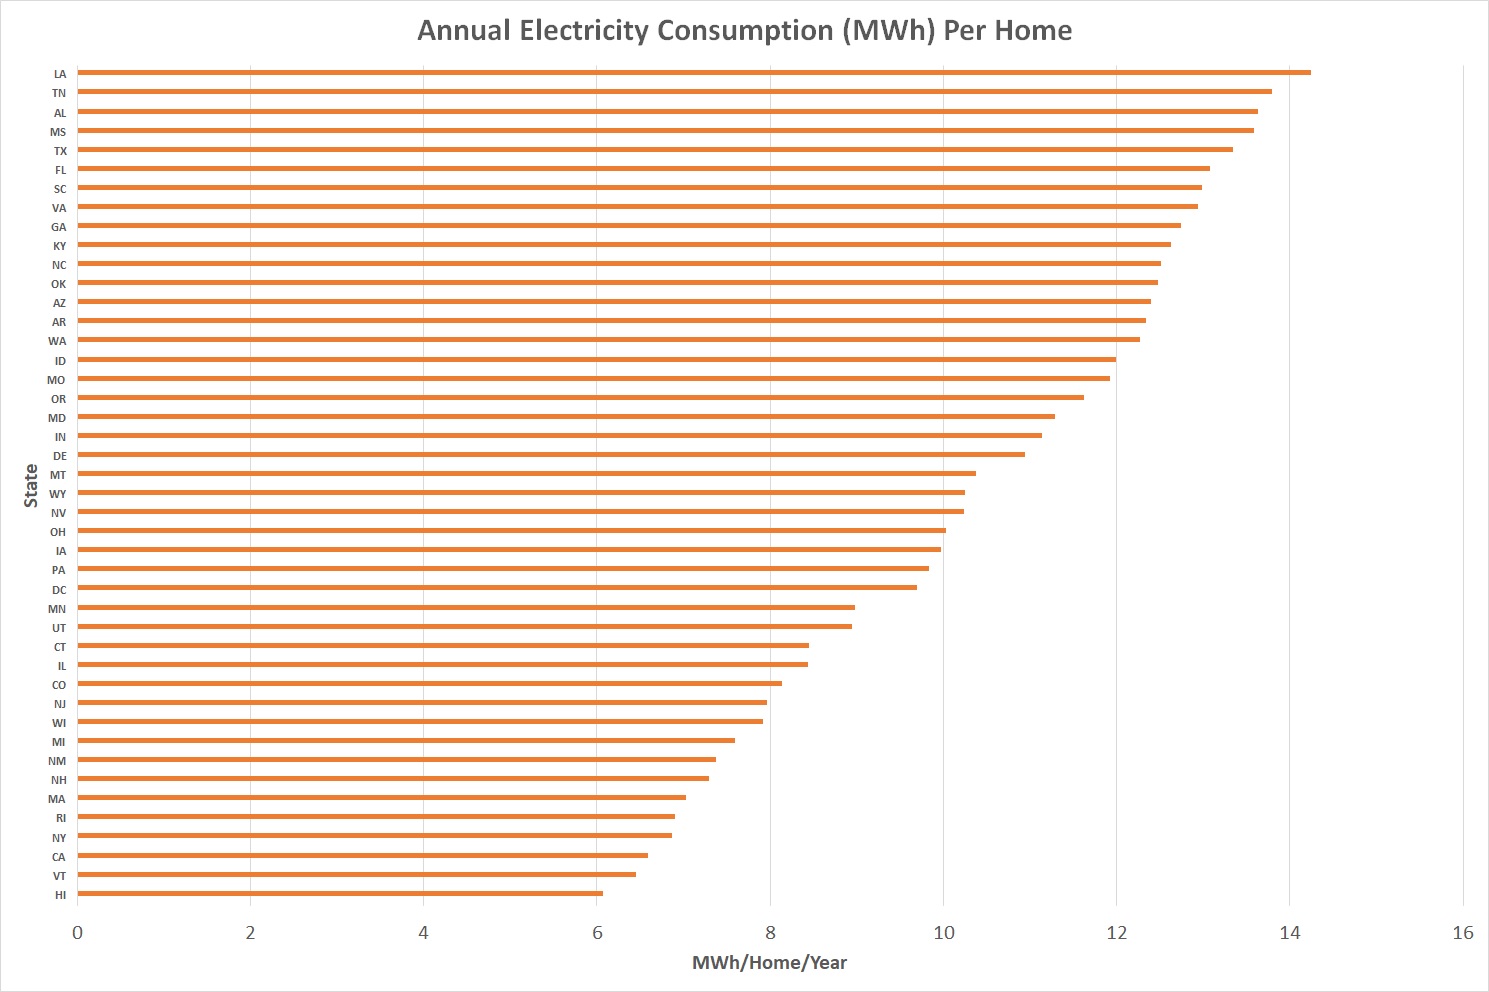 Annual Electricity Consumption Per Year by State